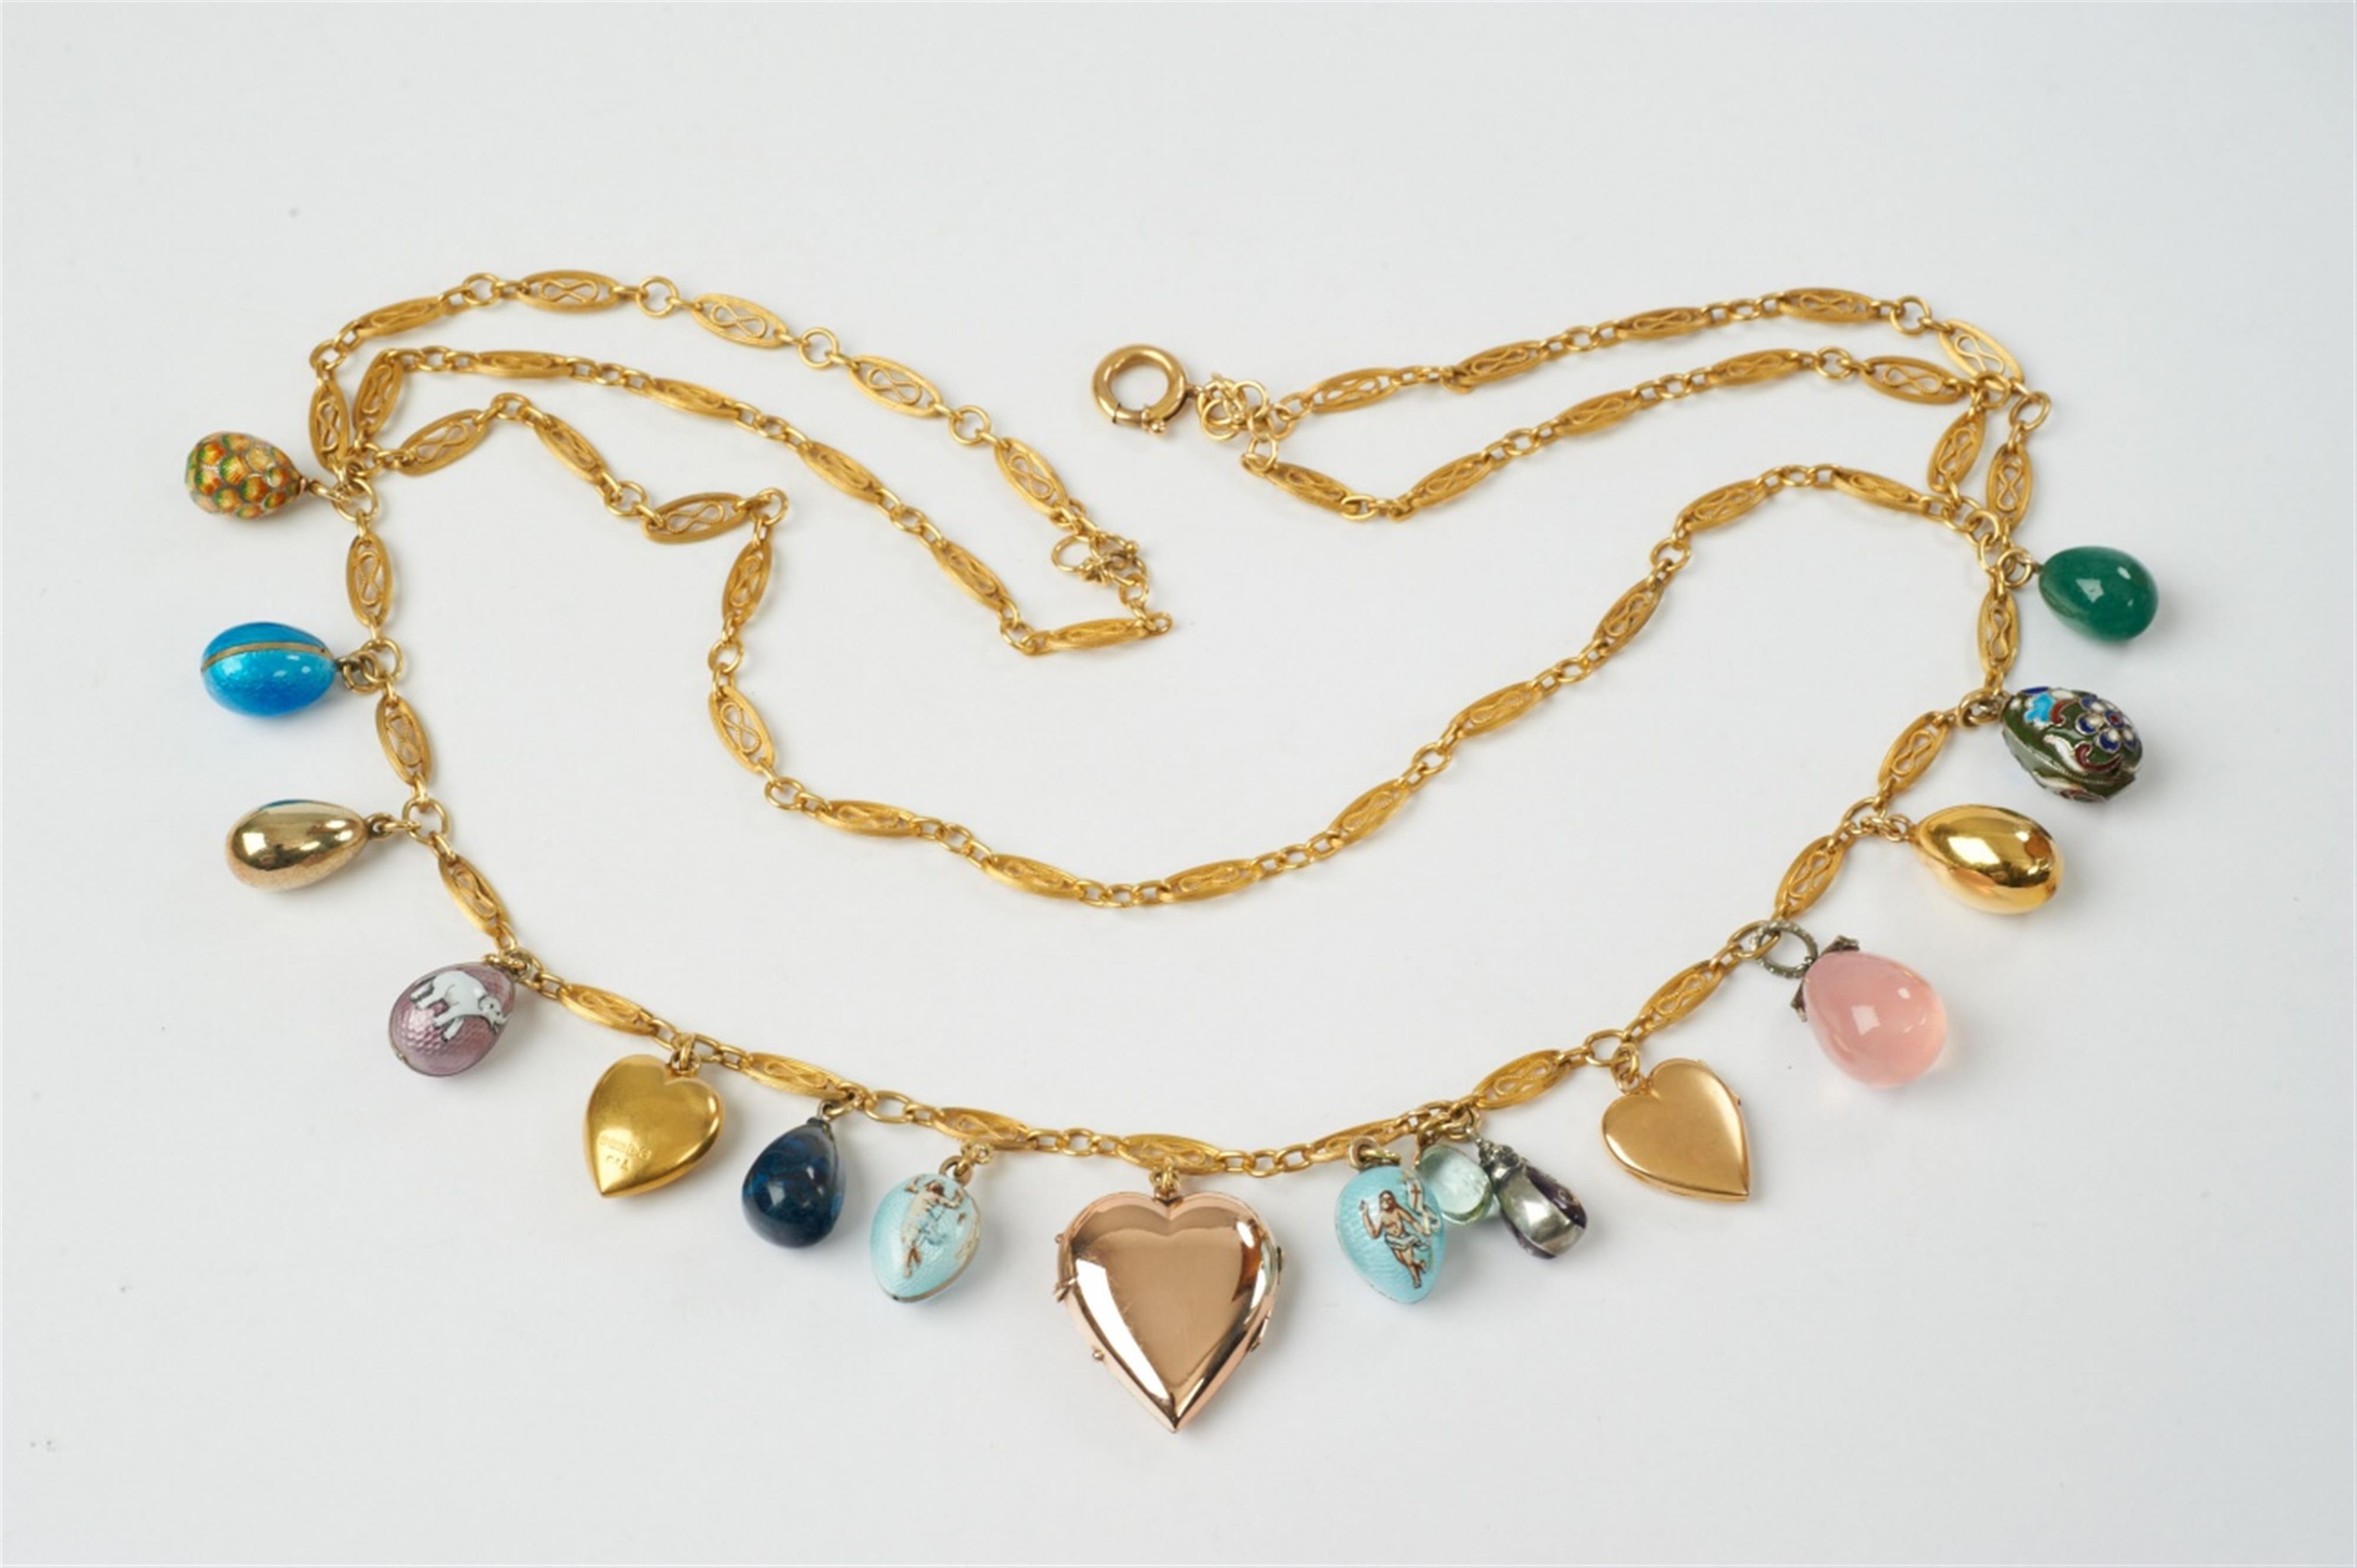 A gold, silver, enamel, gem-set charm necklace with egg- and heart-shaped pendants - image-1